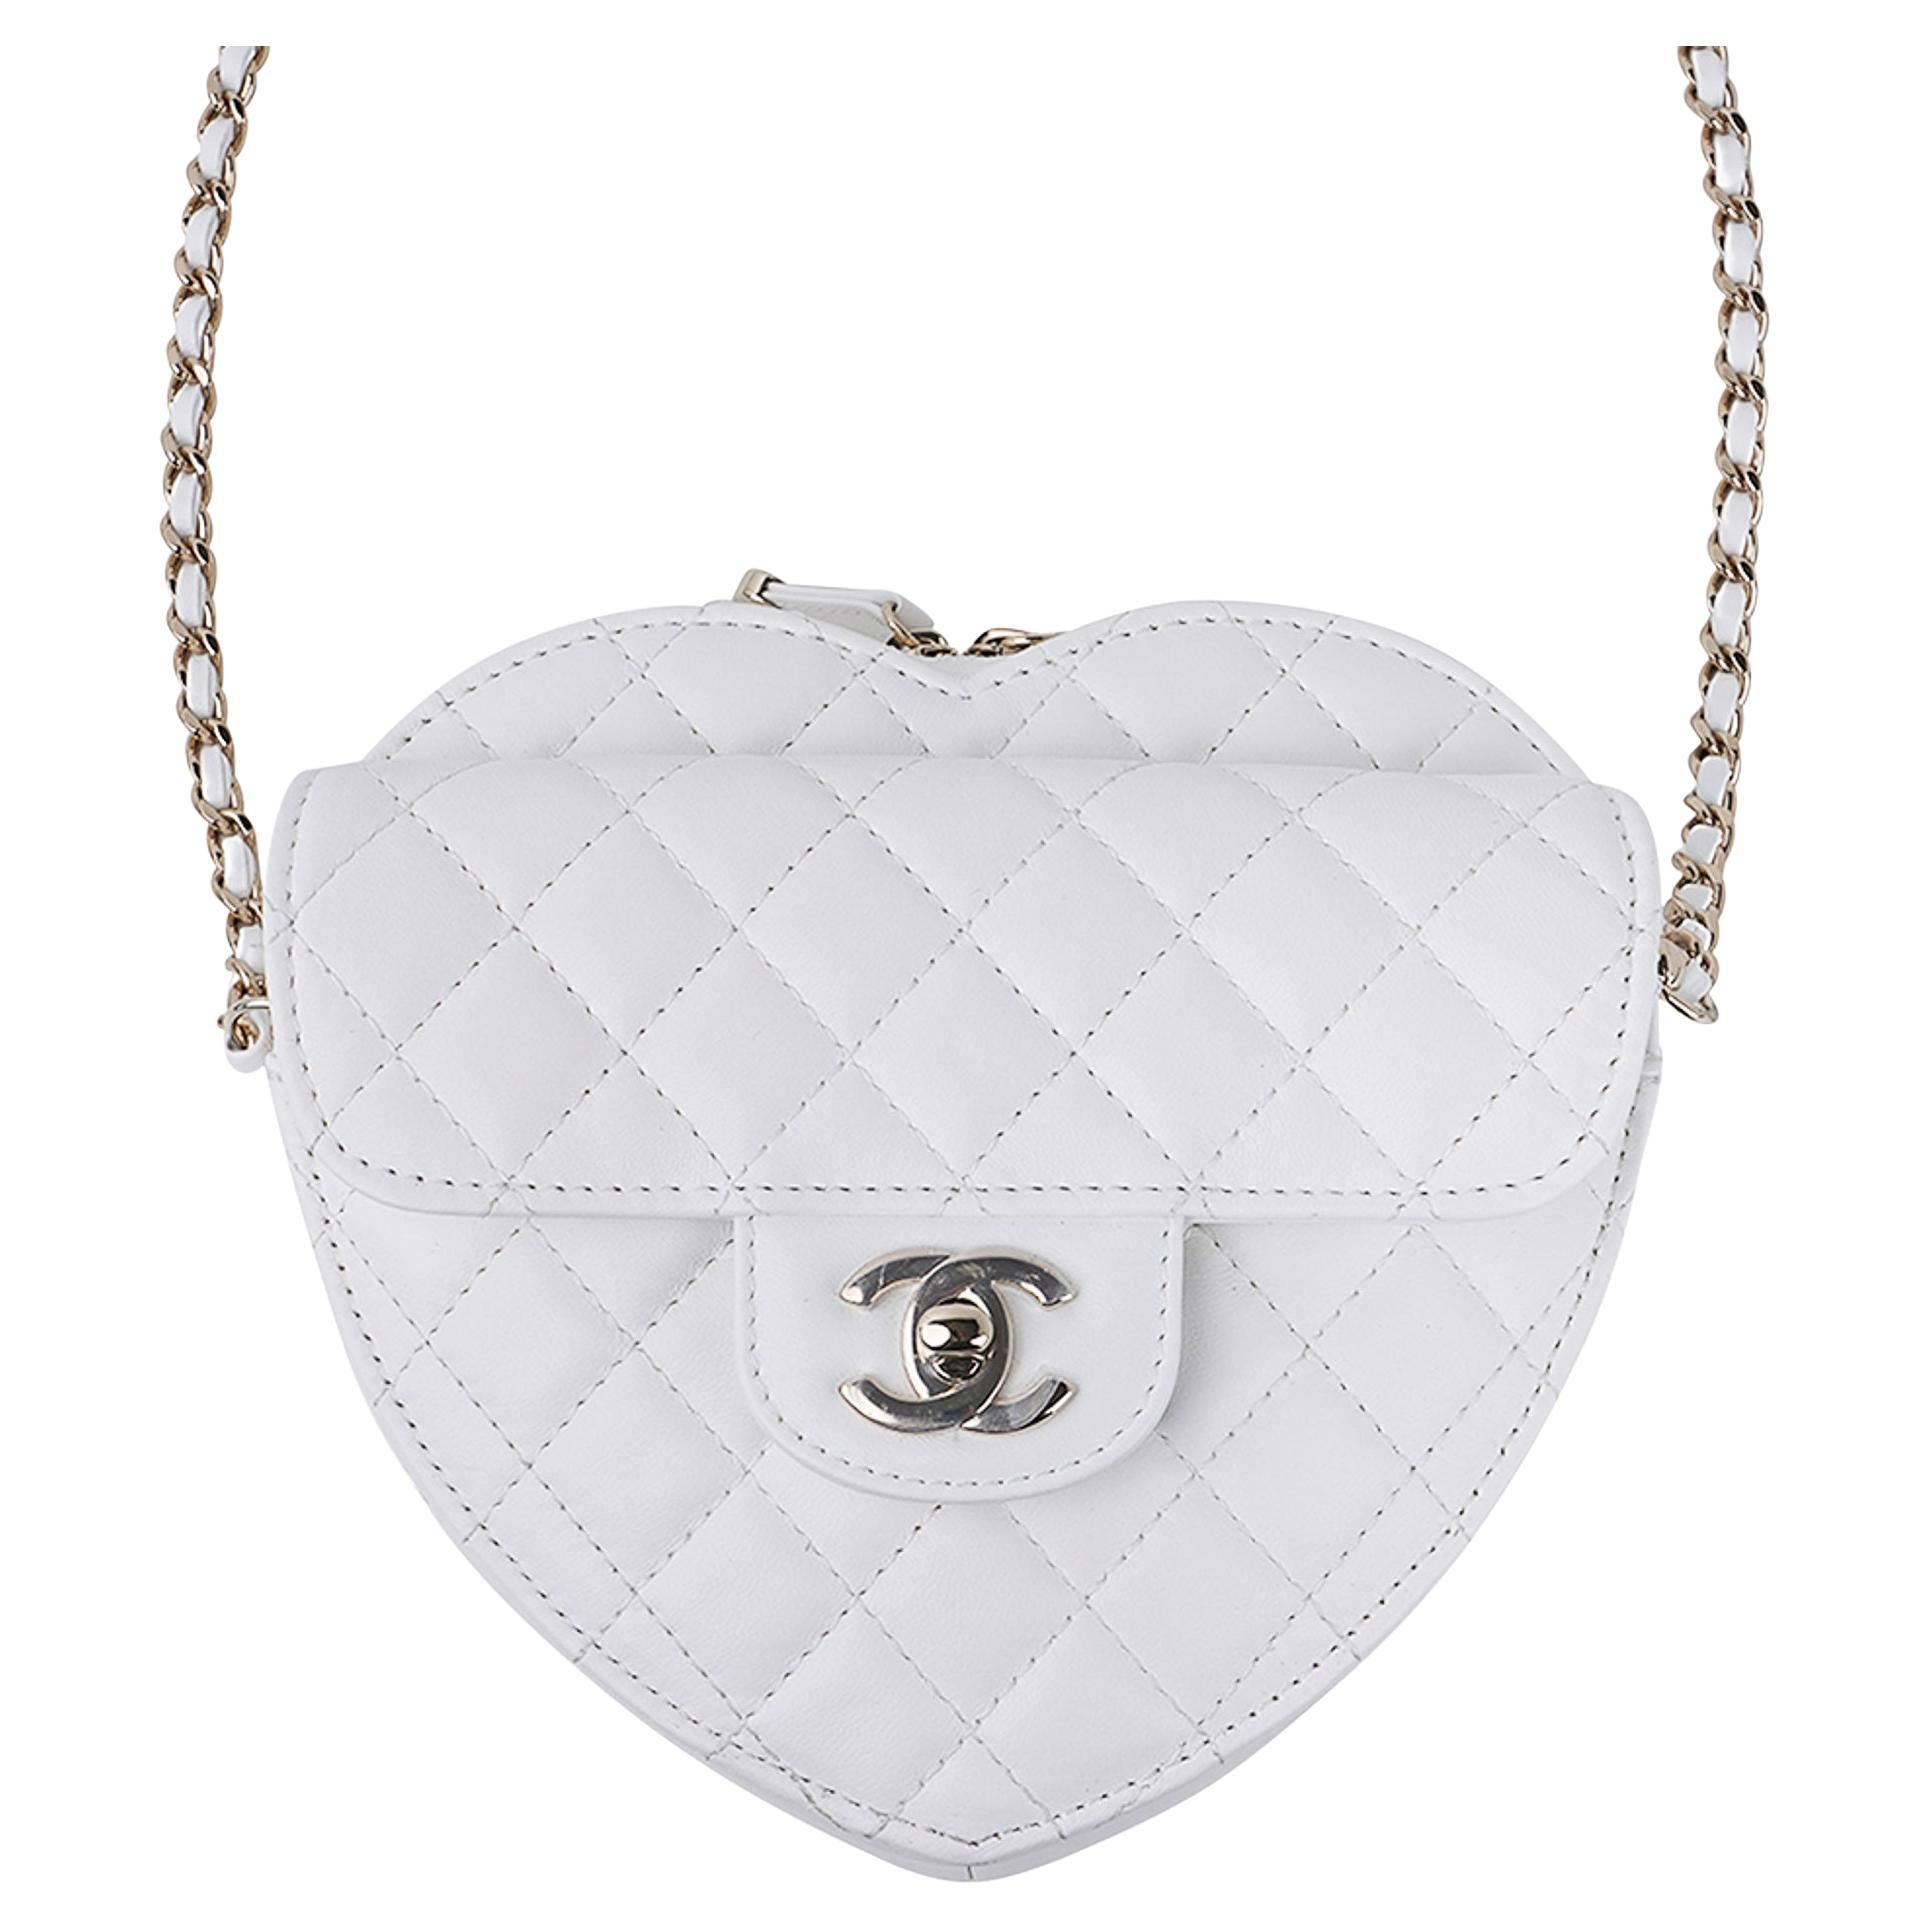 Chanel 2022 Quilted Heart Bag - White Crossbody Bags, Handbags - CHA707233